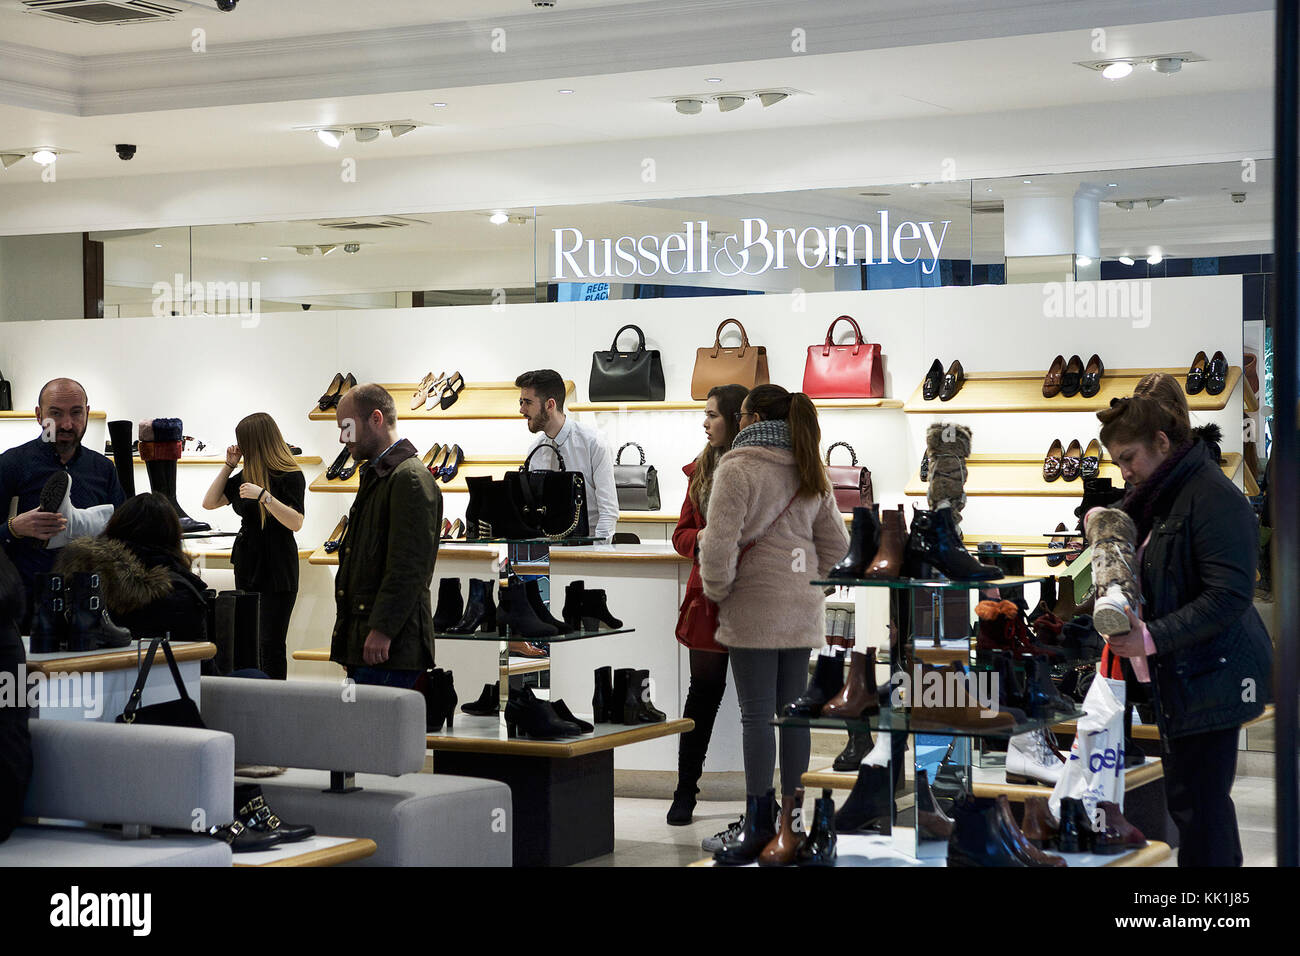 russell bromley shoes sale uk